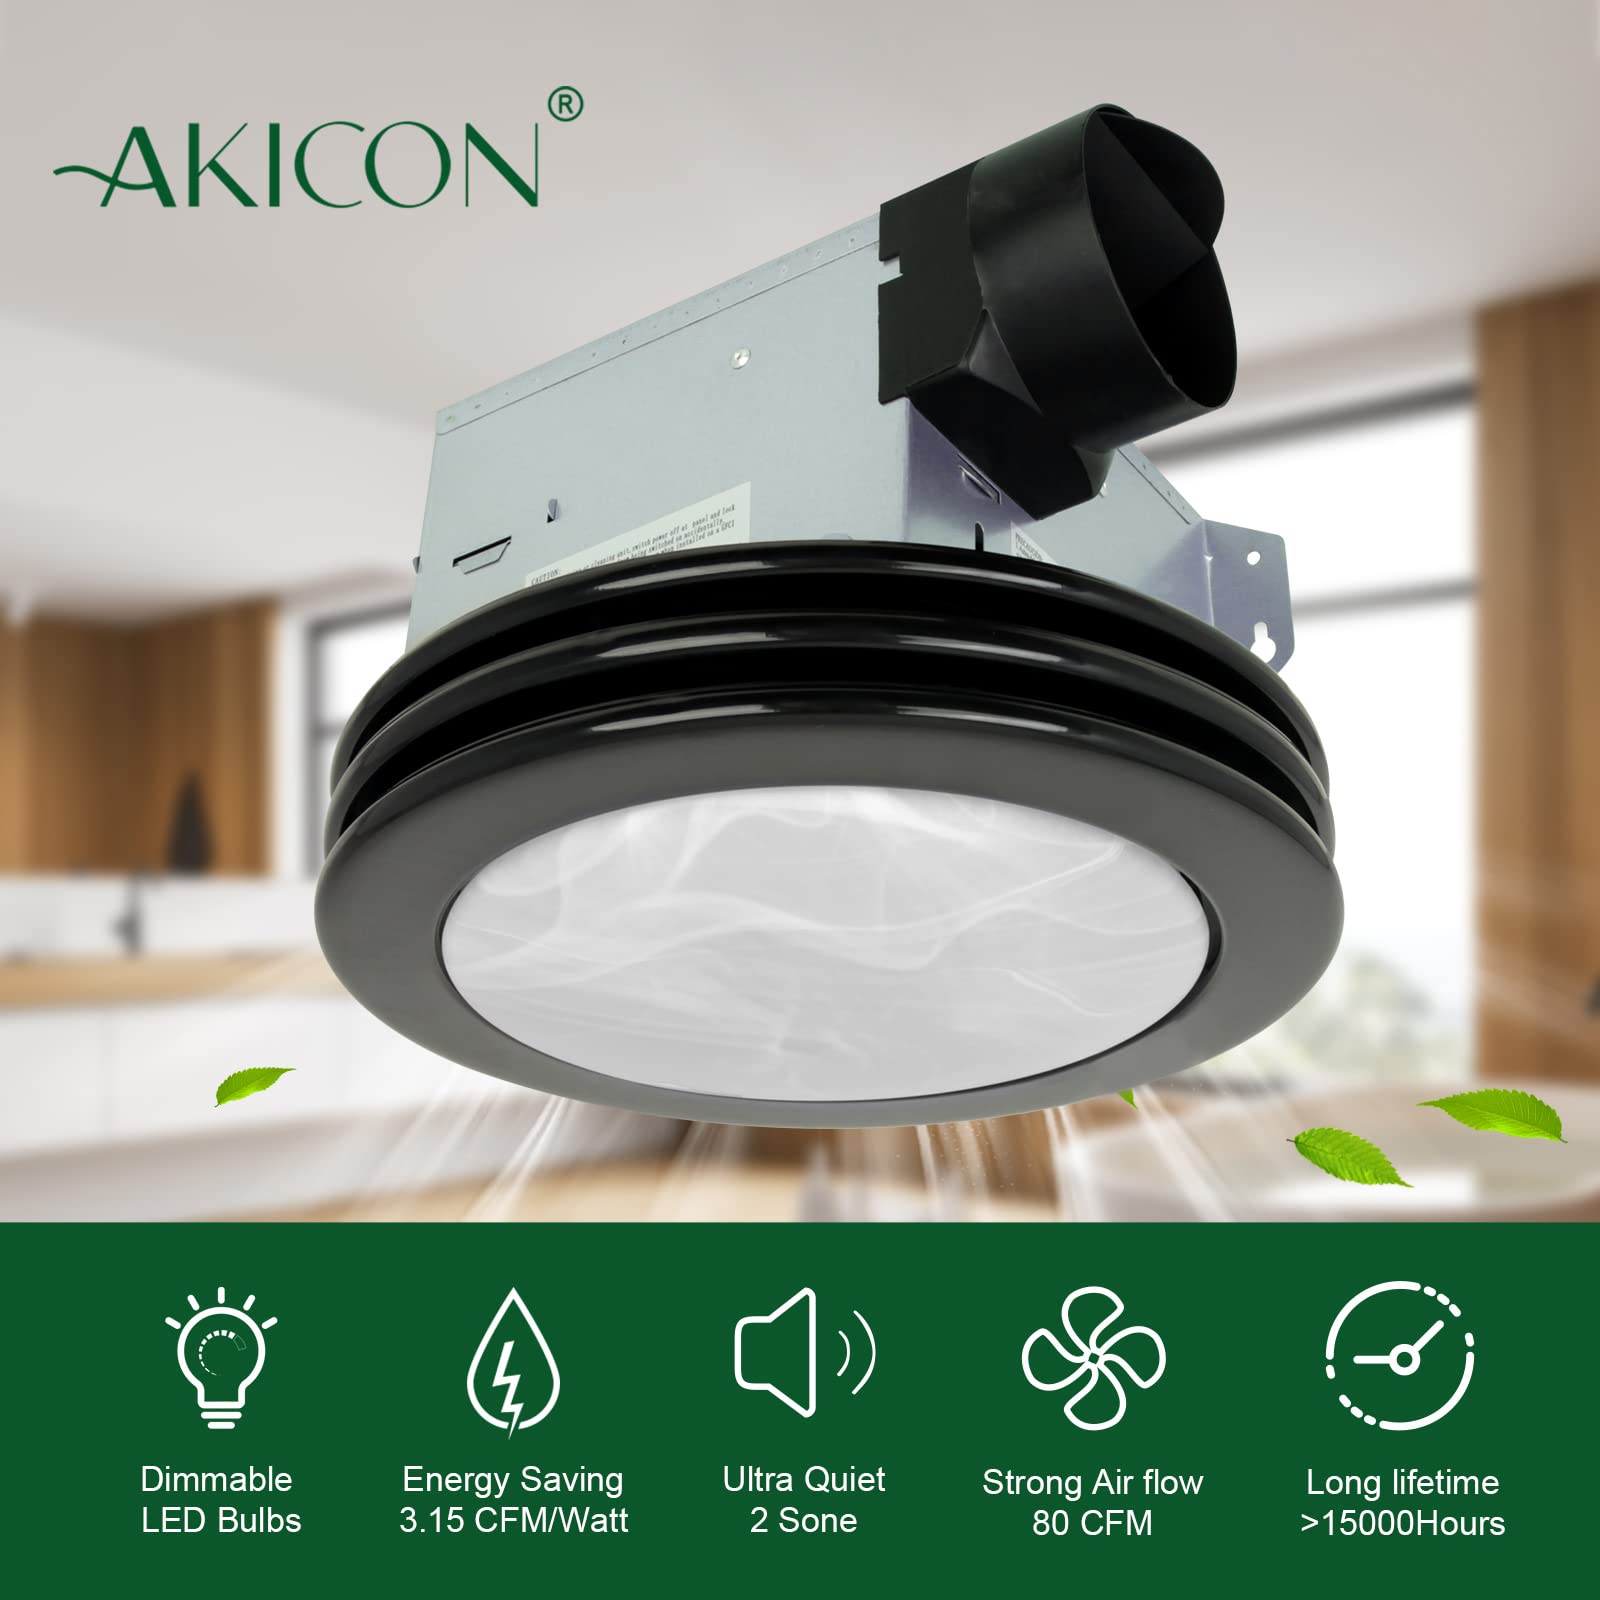 Akicon Ultra Quiet Bathroom Exhaust Fan with LED Light 80CFM 2.0 Sones Round Bathroom Ventilation Fan with Frosted Glass Cover Matte Black Finish (Matte black)